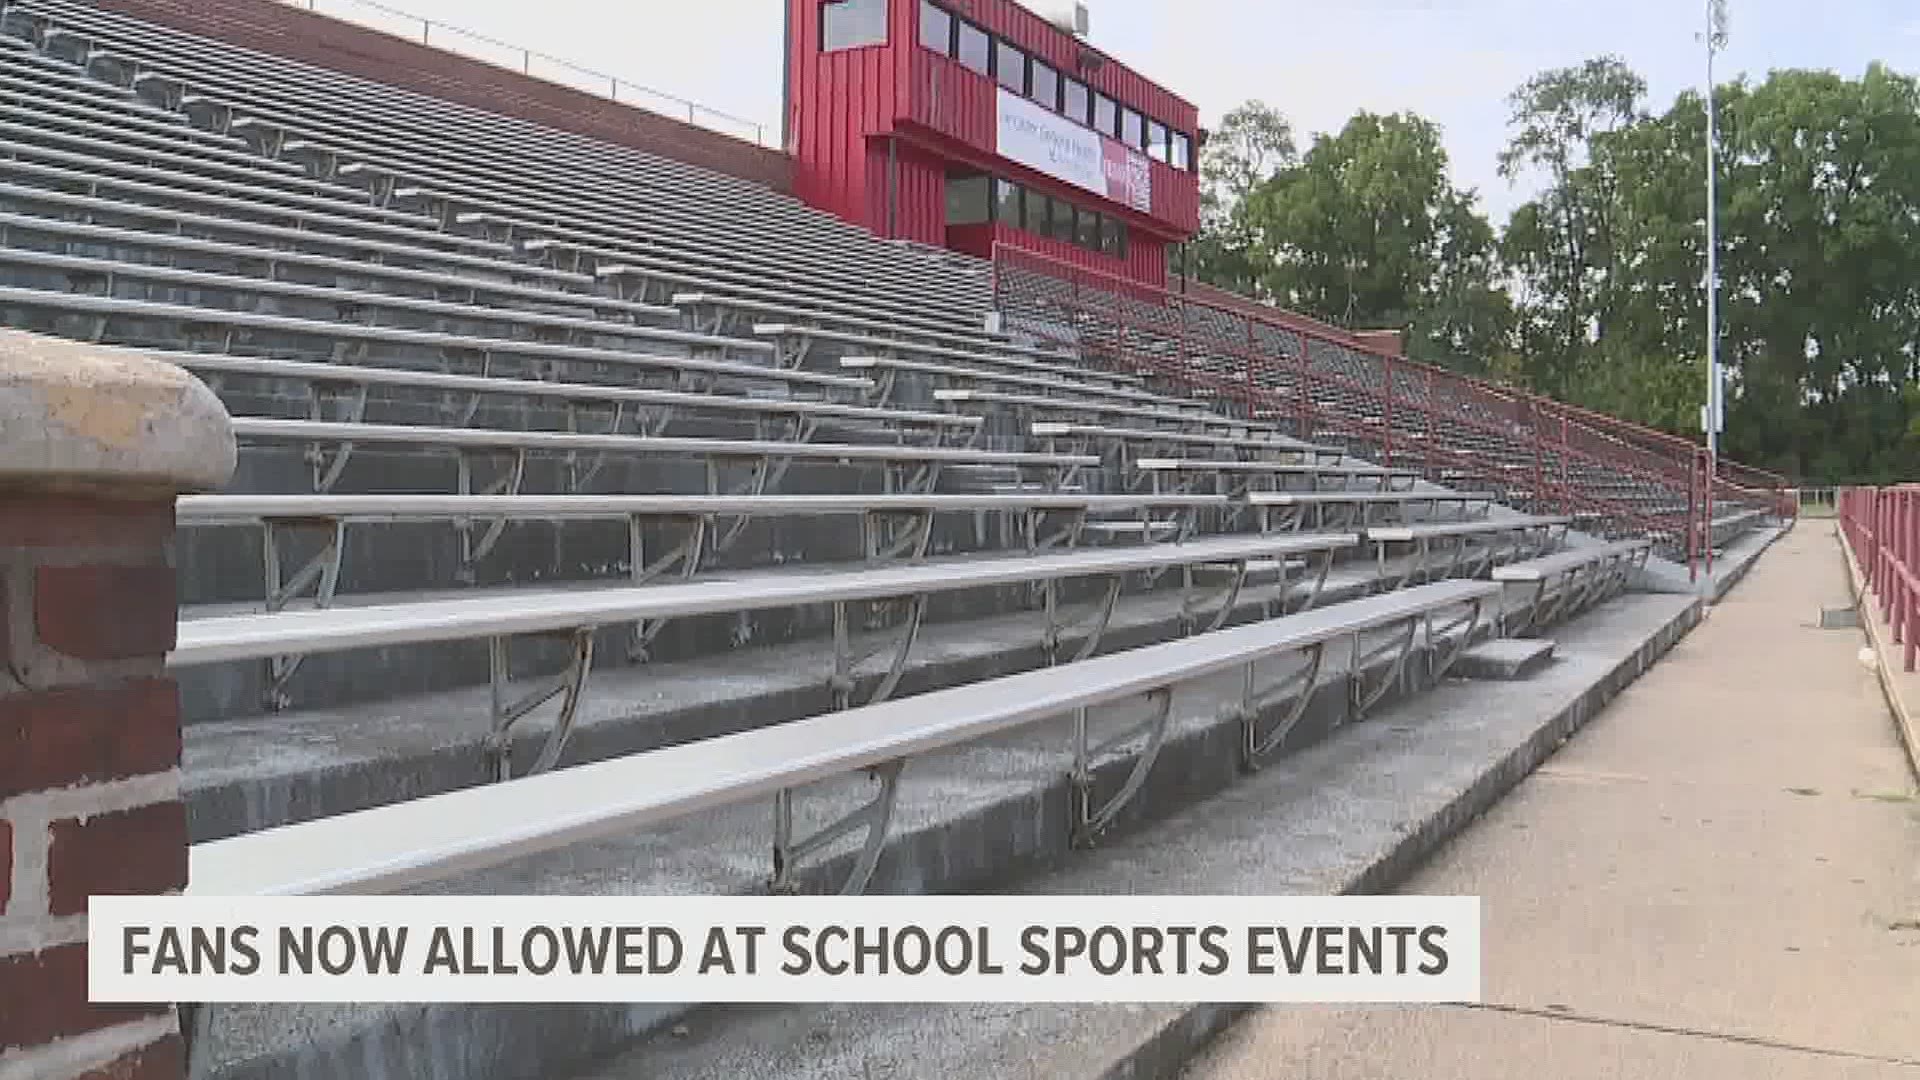 School sporting events are now allowed to invite friends and family to watch, but they're still limited to 250 people outside.